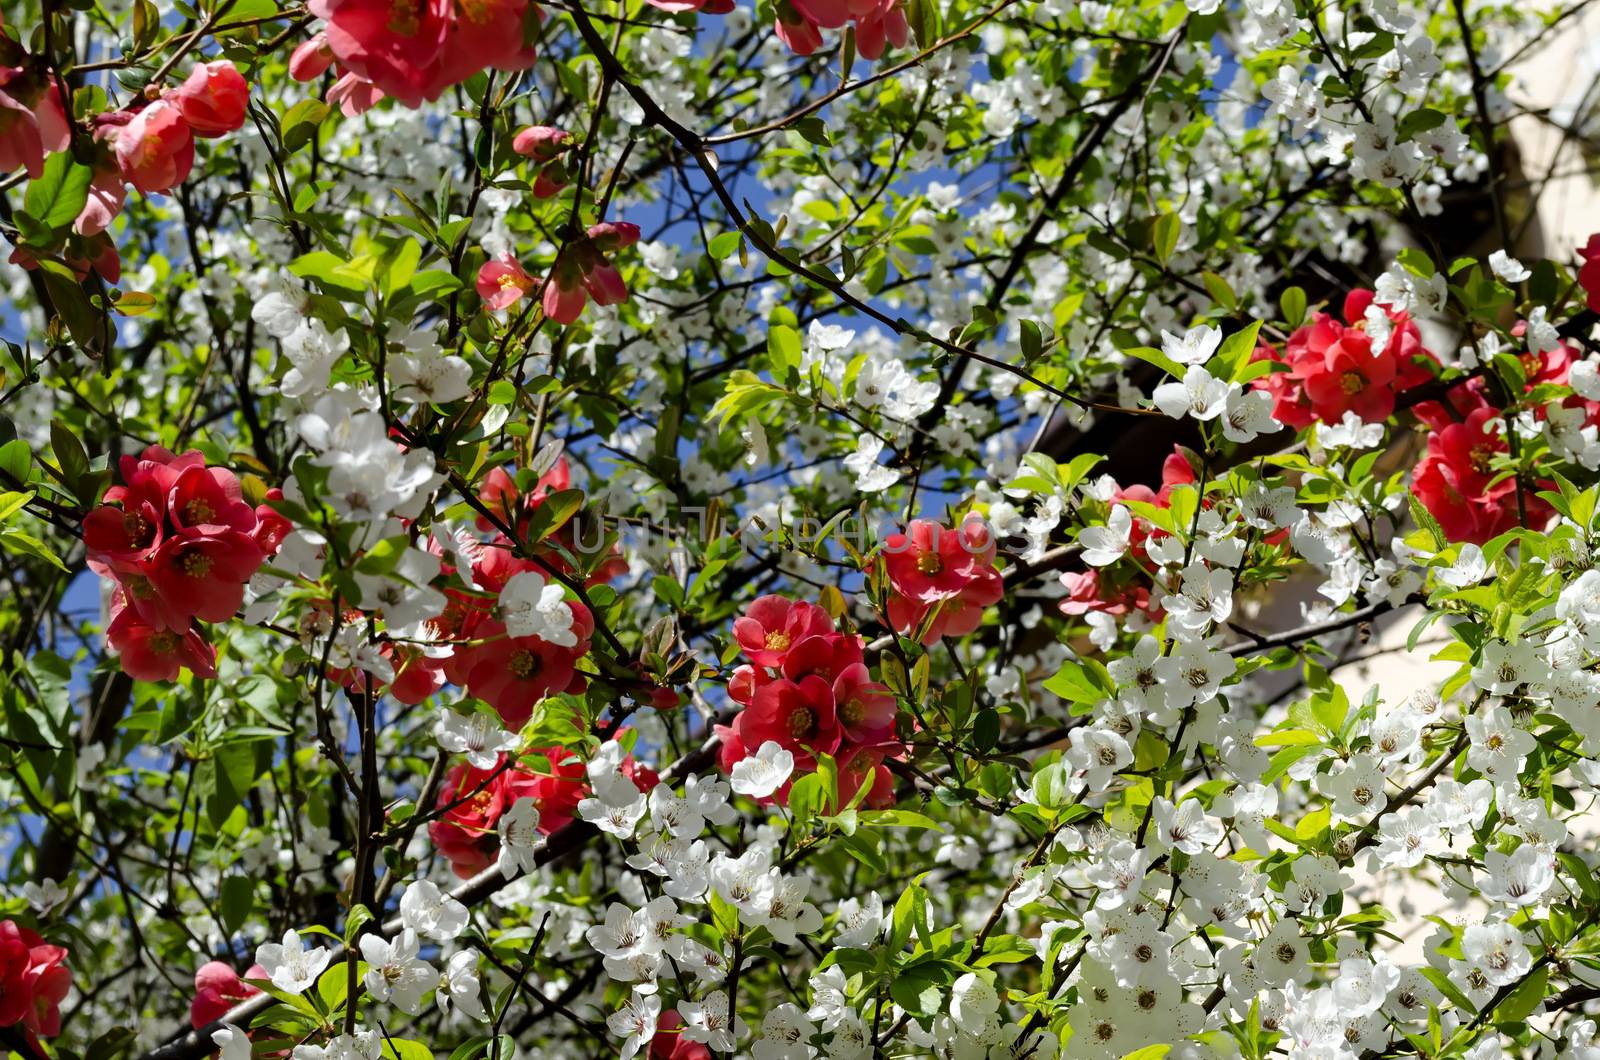 Branches with fresh bloom  of plum-tree  or Prunus domestica and Japanese quince or Chaenomeles speciosa flower in garden, Sofia, Bulgaria